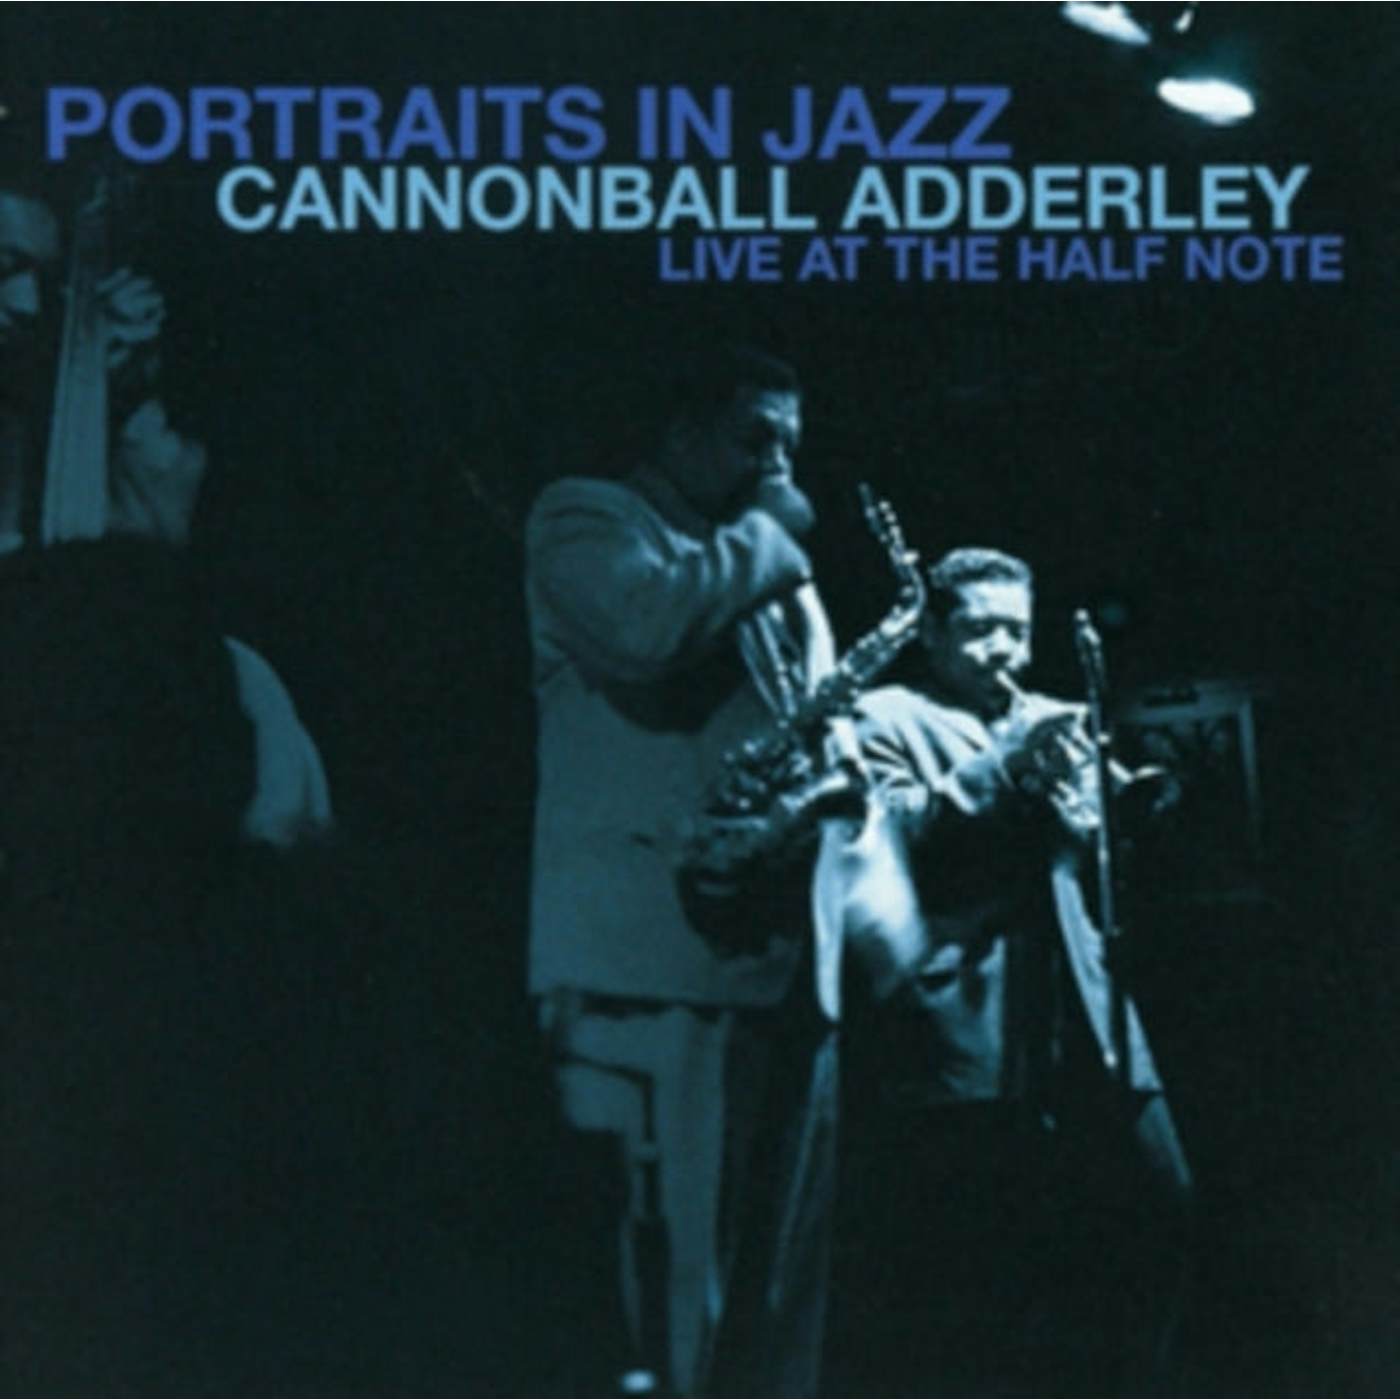 Cannonball Adderley CD - Portraits In Jazz - Live At The Half Note